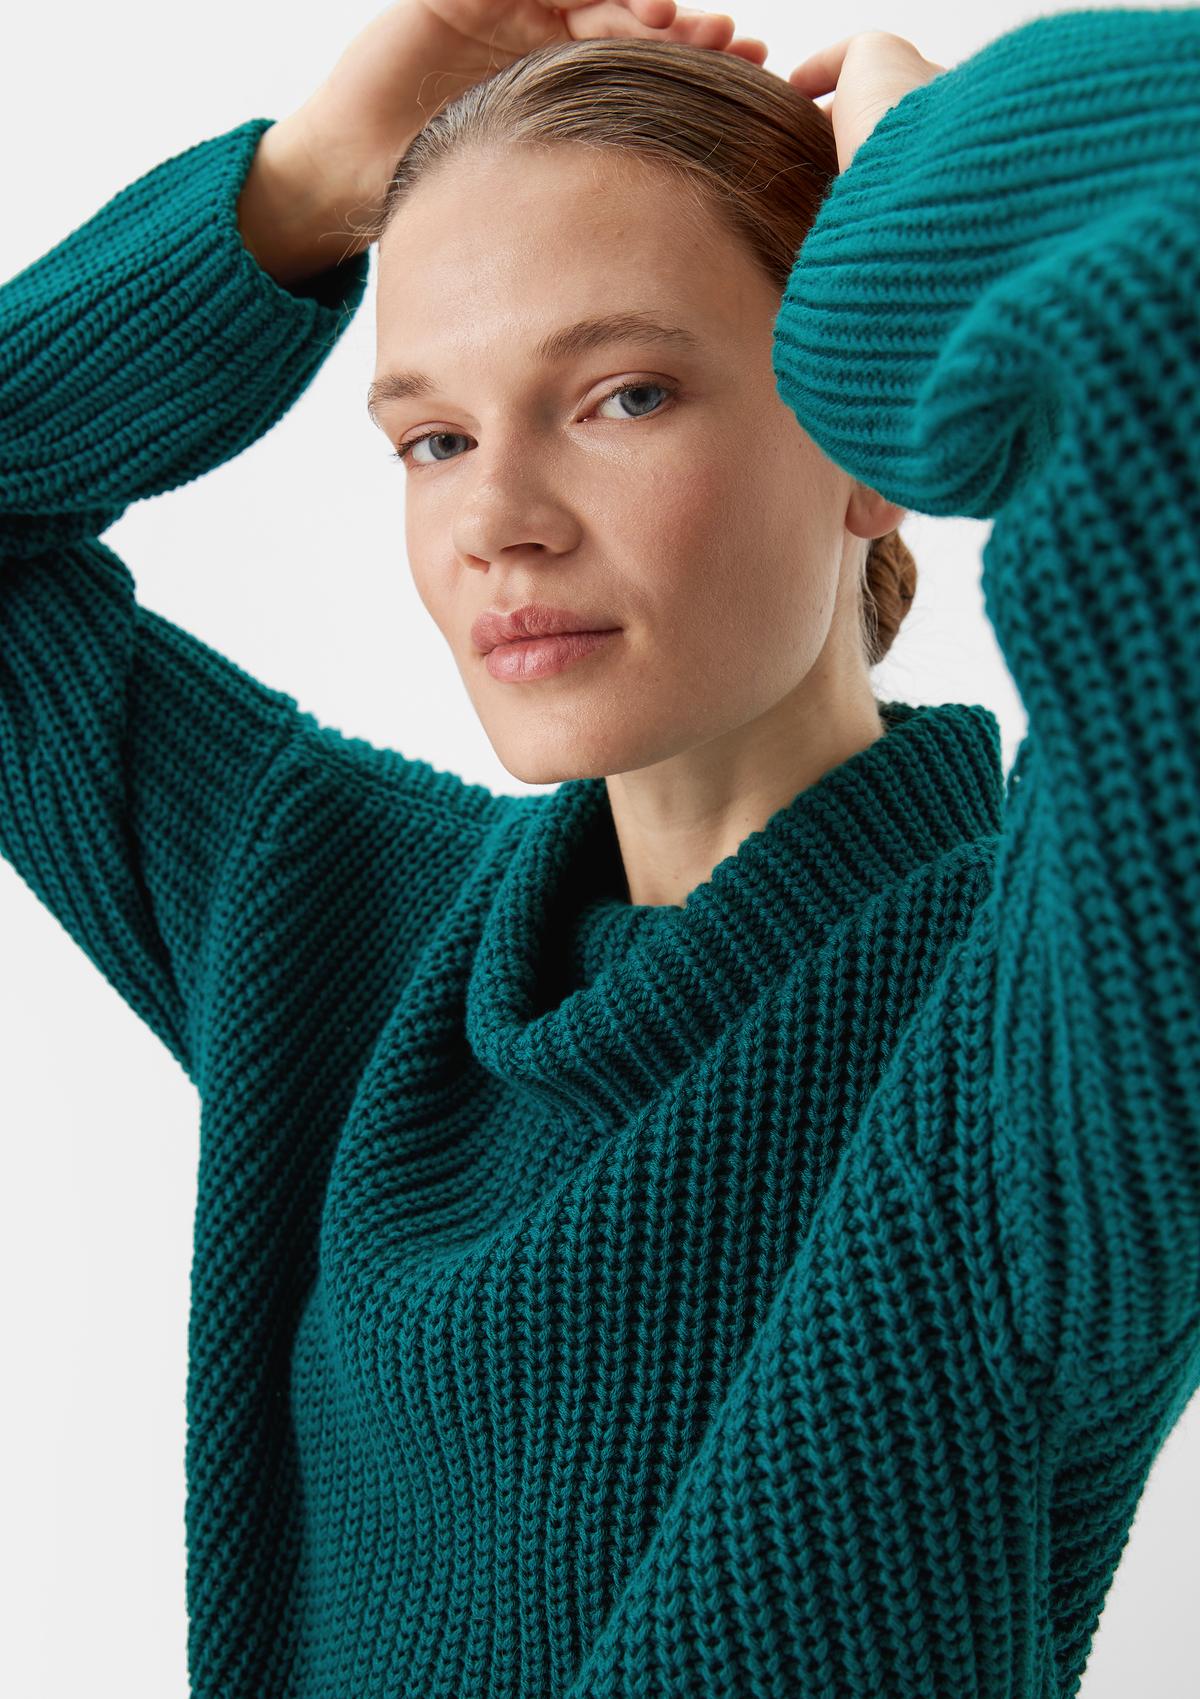 comma Knitted jumper